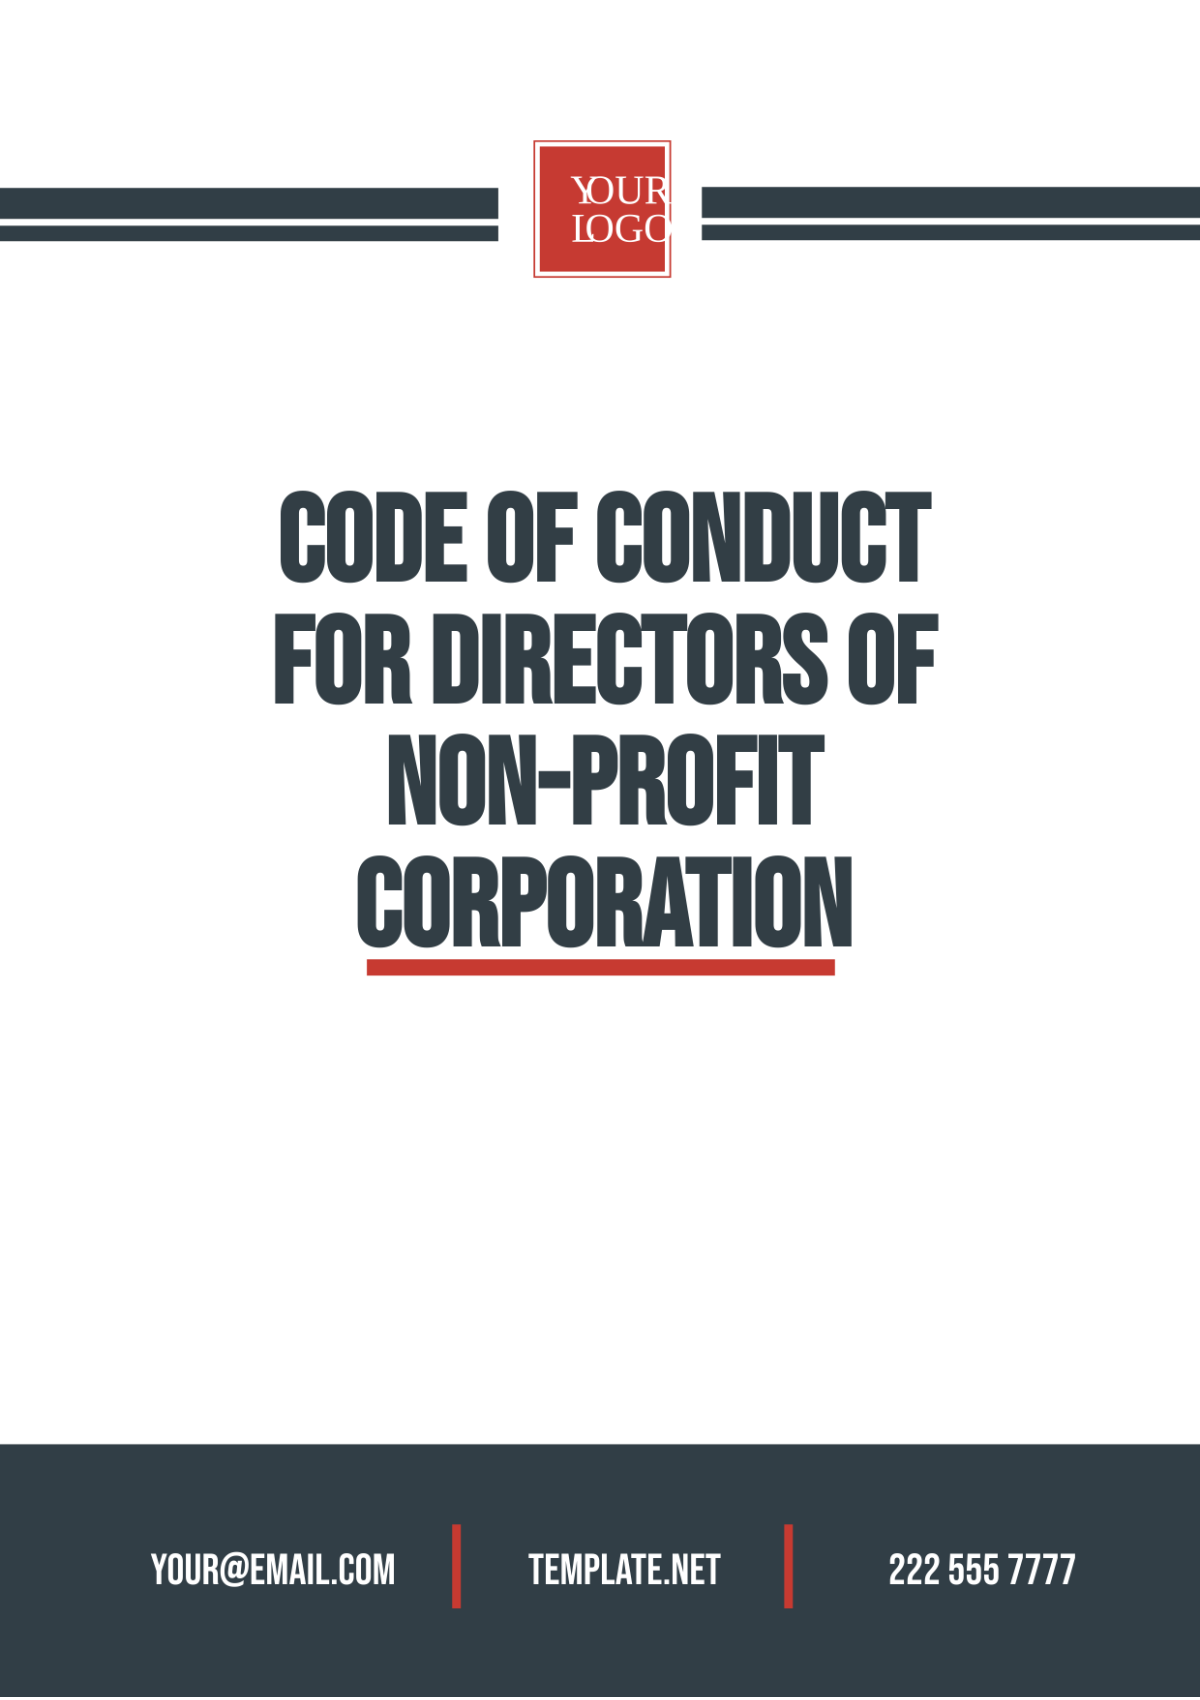 Free Code of Conduct for Directors of Non-Profit Corporation Template